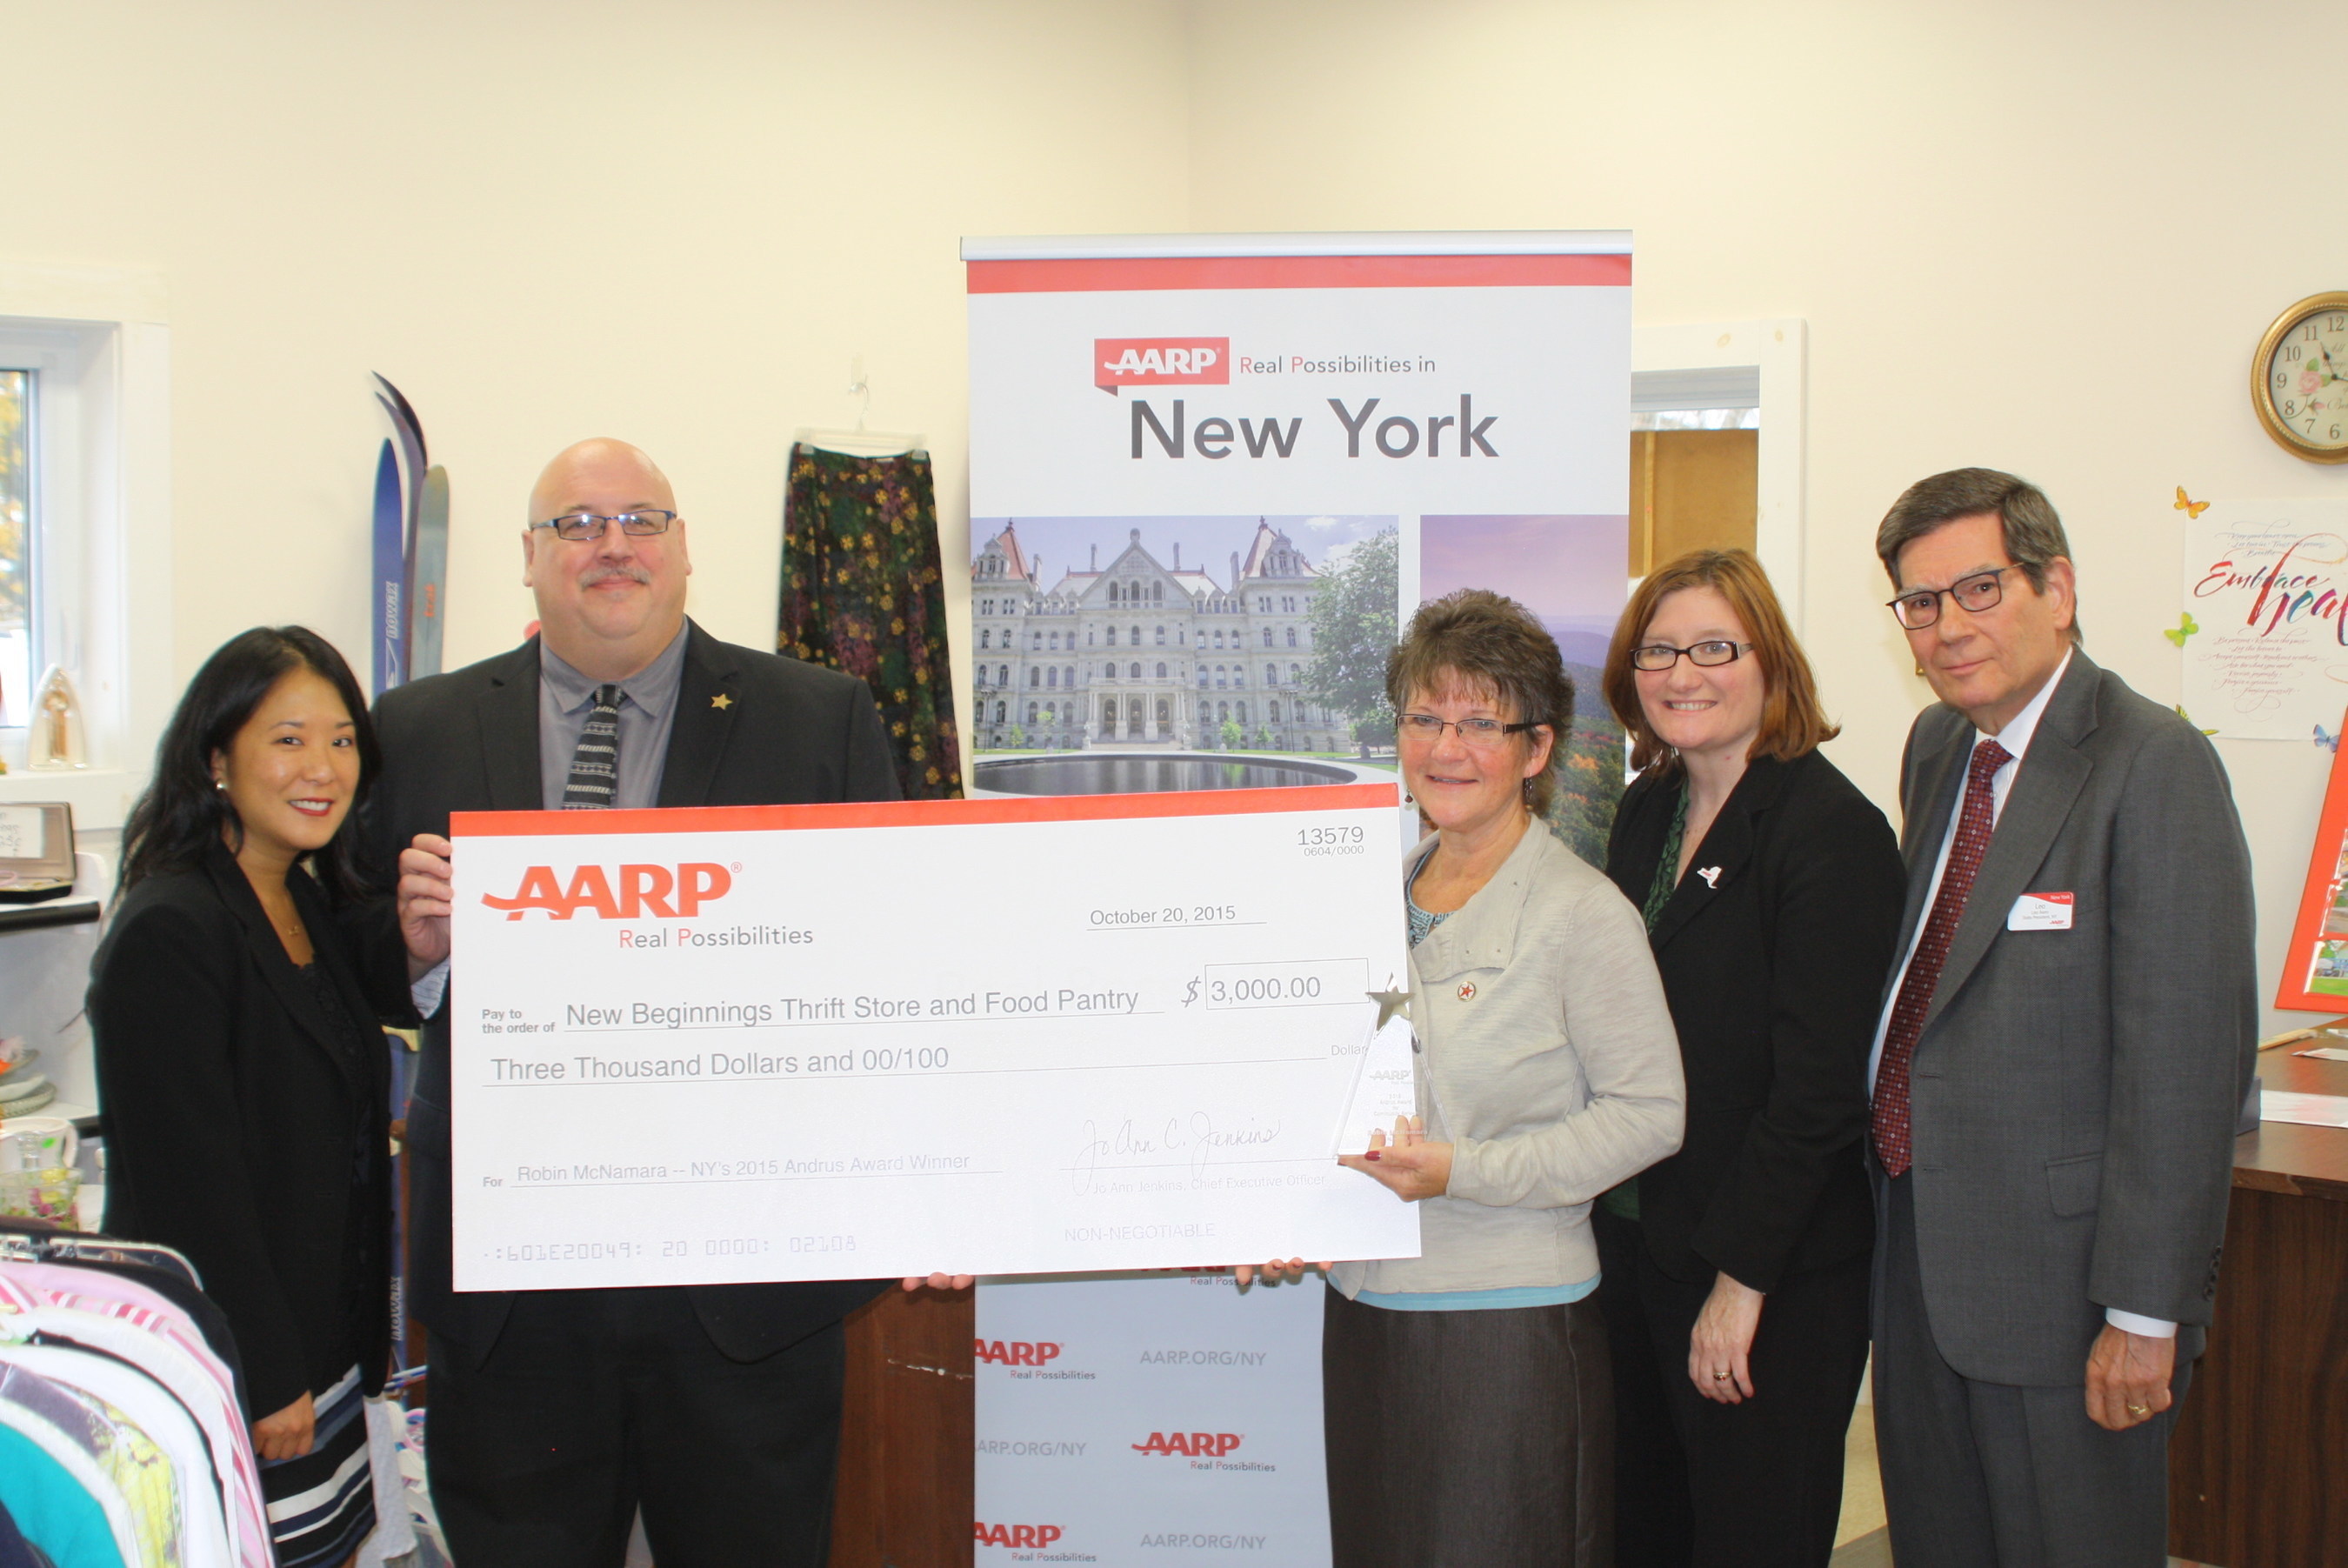 Robin McNamara, third from right, receives $3,000 check from AARP for her selection as the 2015 AARP New York Andrus Award for Community Service recipient. Photo Credit: St. Lawrence Plaindealer